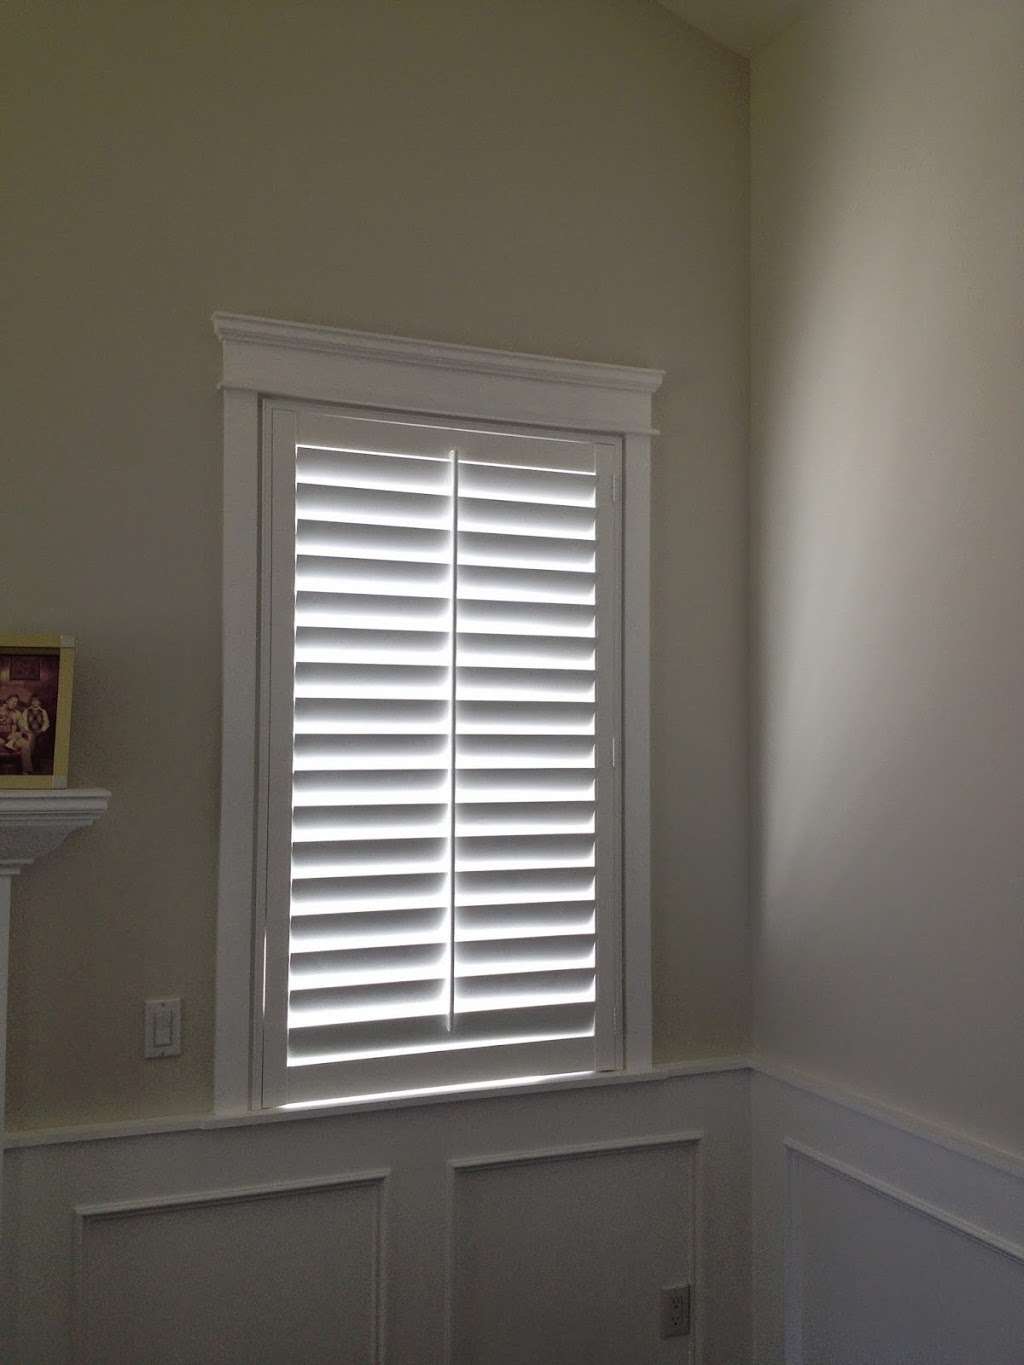 Decor Blinds And Shutters | 22657 Jameson Dr, Calabasas, CA 91302 | Phone: (818) 708-1012